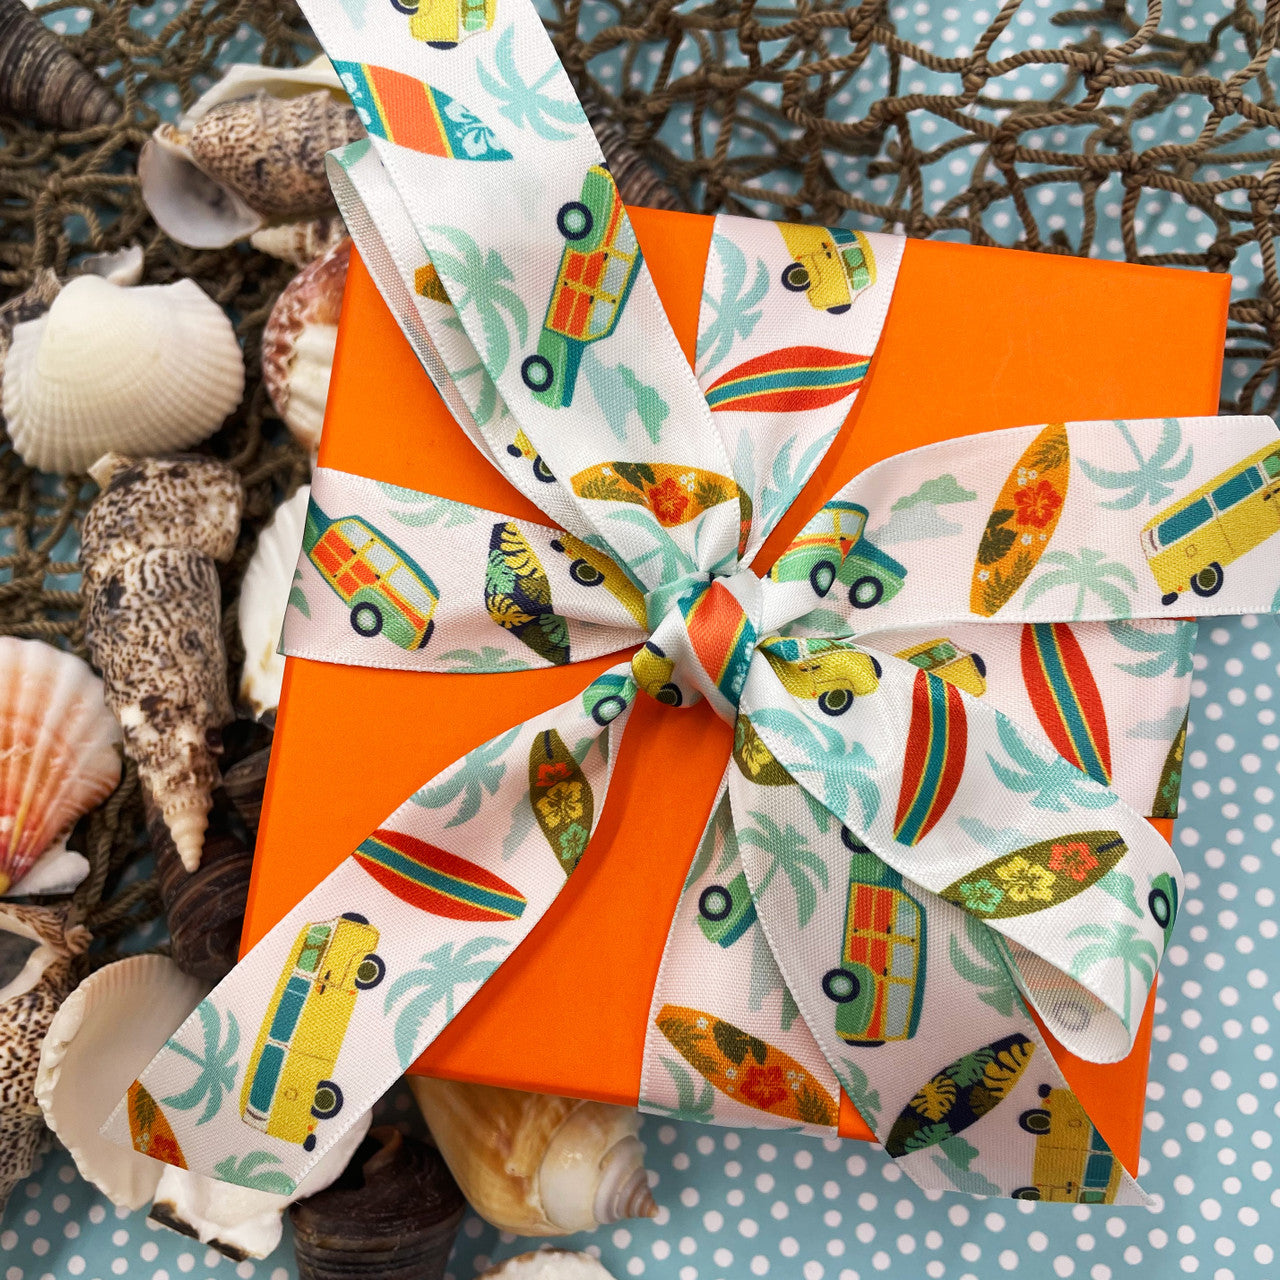 Tie a pretty bow on a gift box for your favorite surfer!